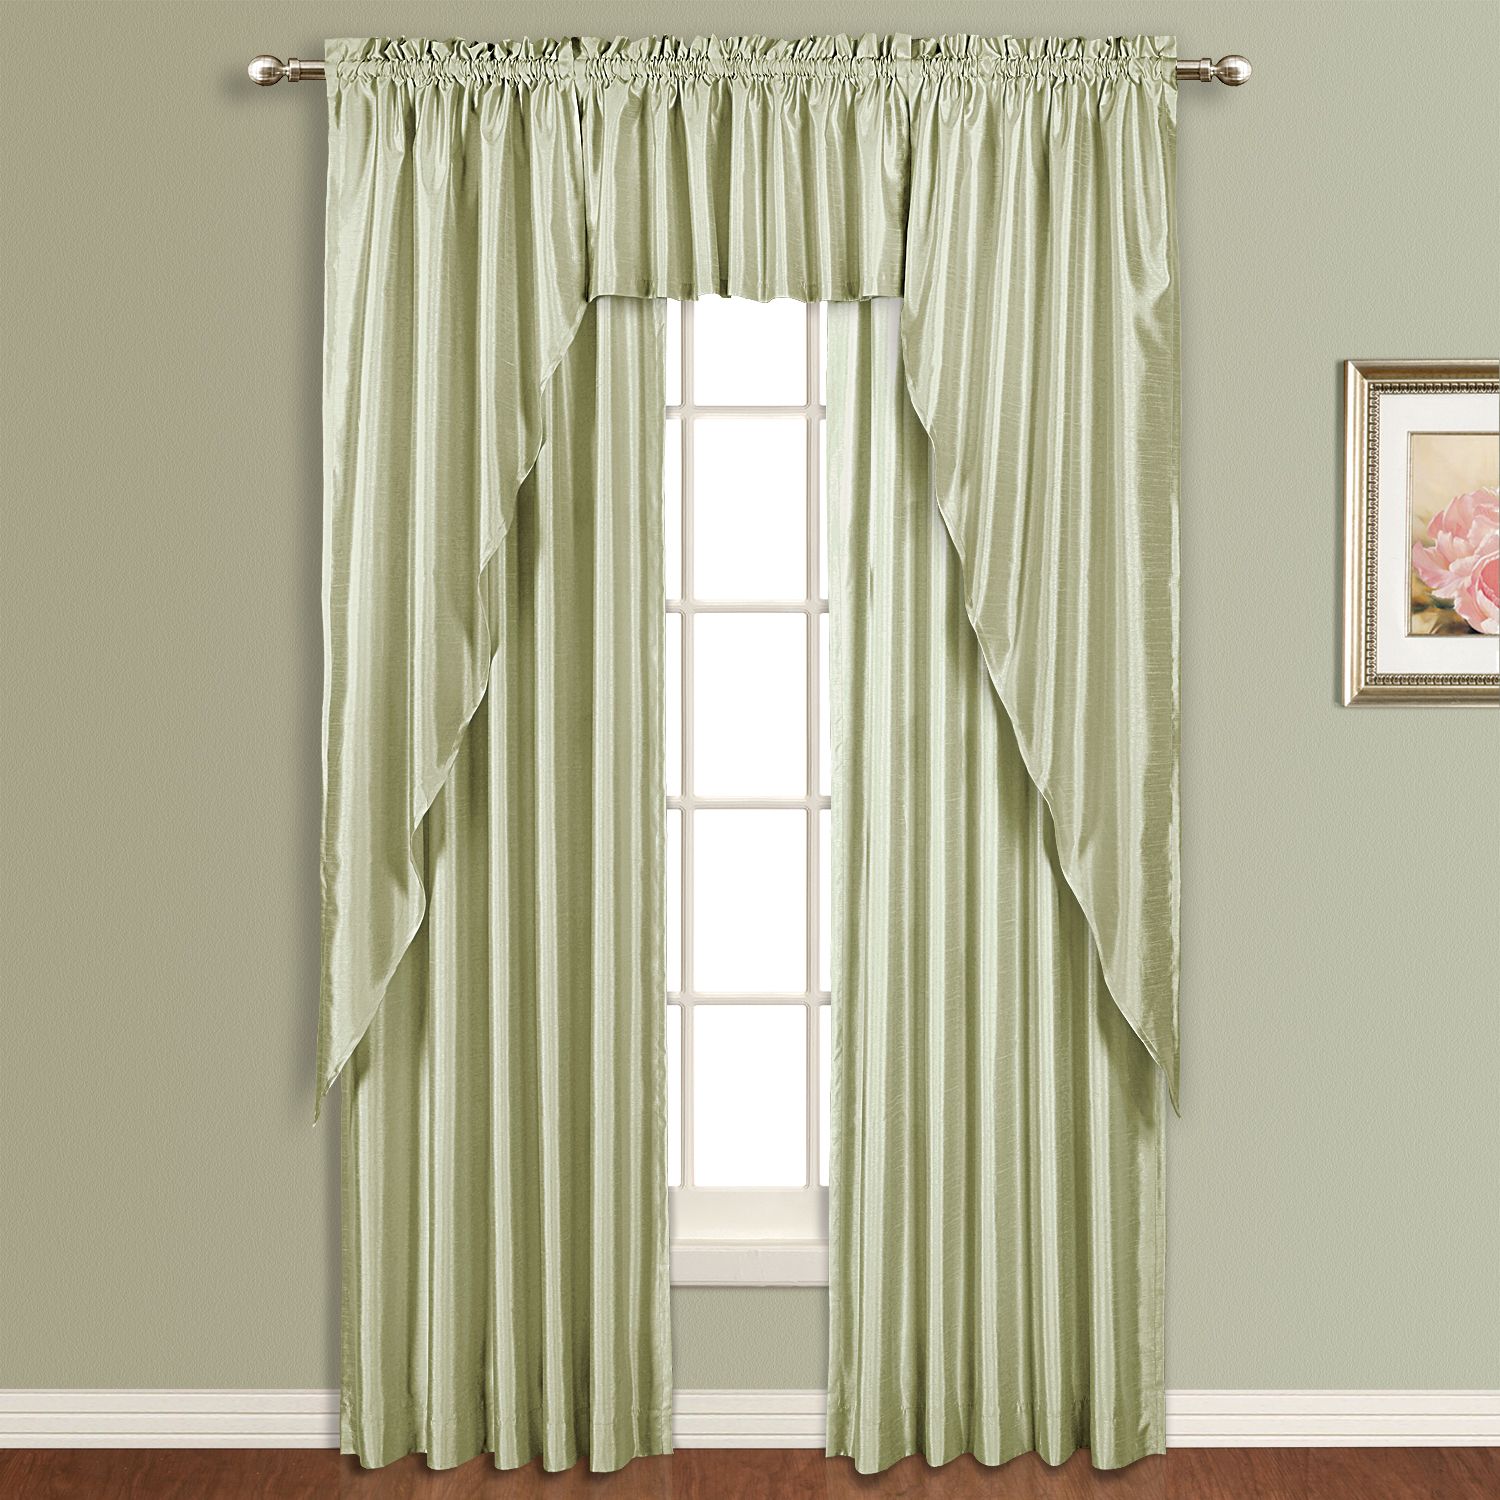 United Curtain Company Anna 54 X 84 faux silk panel: white, natural, sage, taupe, blue, gold, burgundy & chocolate